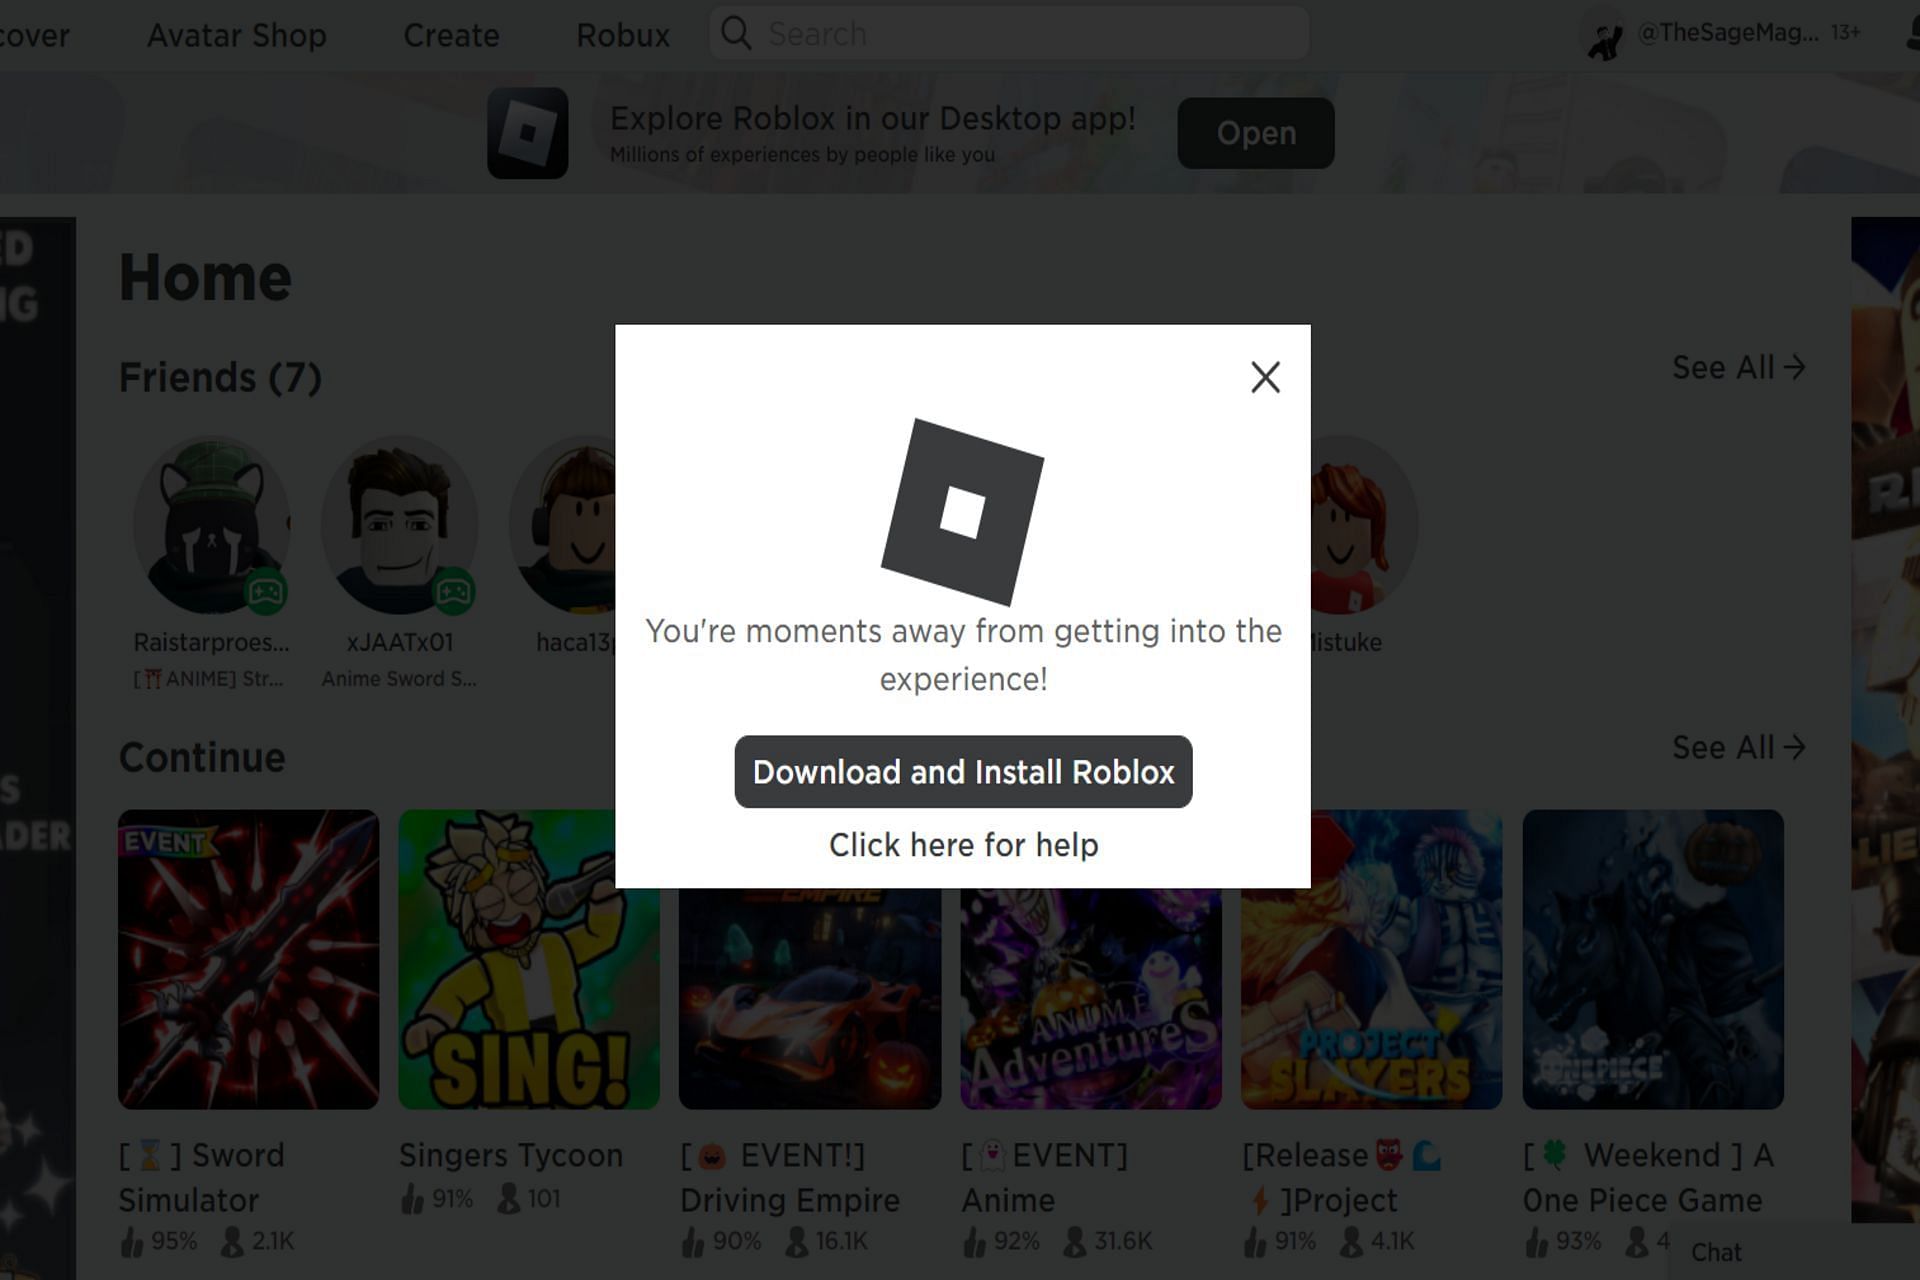 How to change your avatar profile picture on Roblox